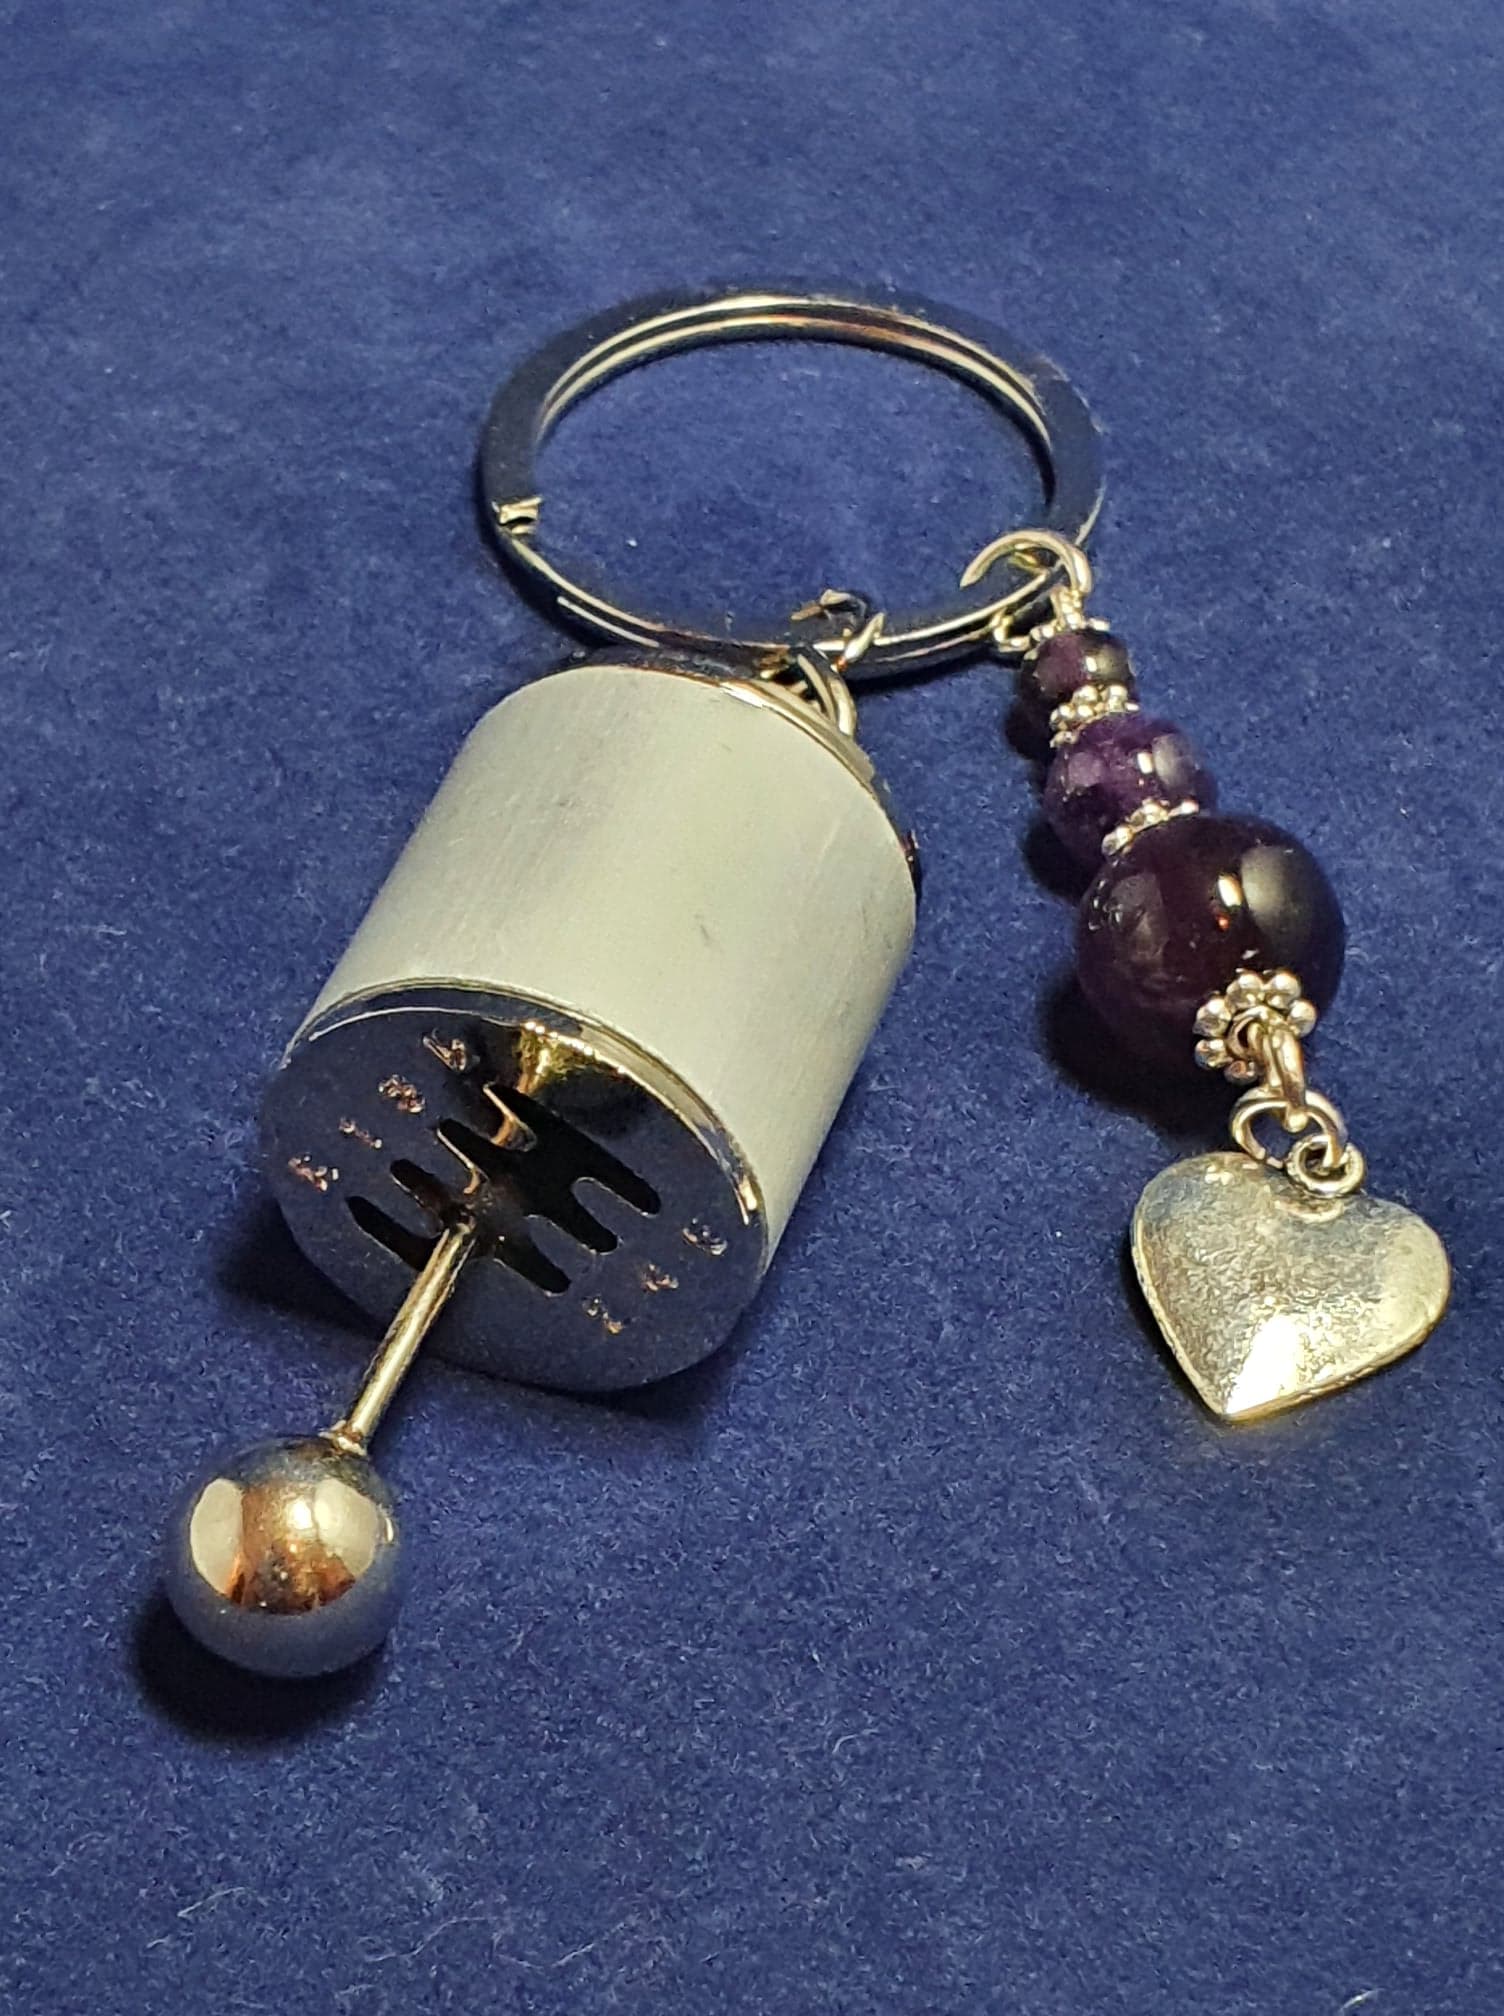 Novelty Gear stick Key ring with Amethyst